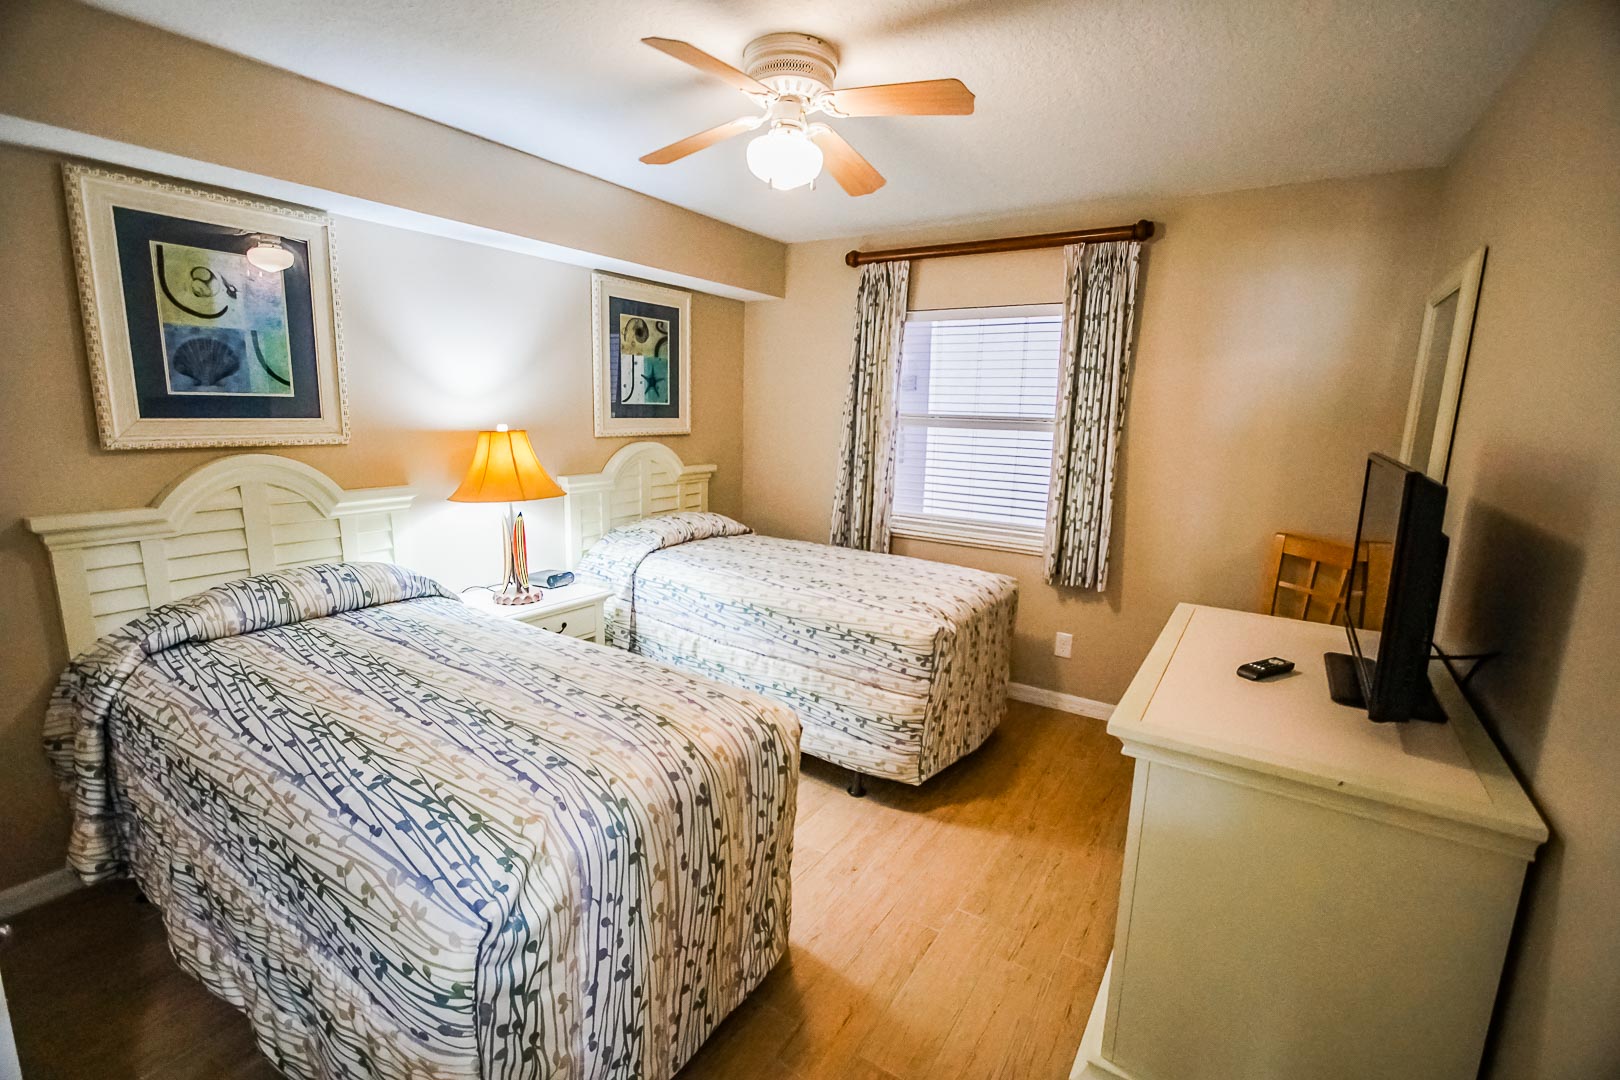 A spacious 2 bedroom unit with twin beds at VRI's The Resort on Cocoa Beach in Florida.